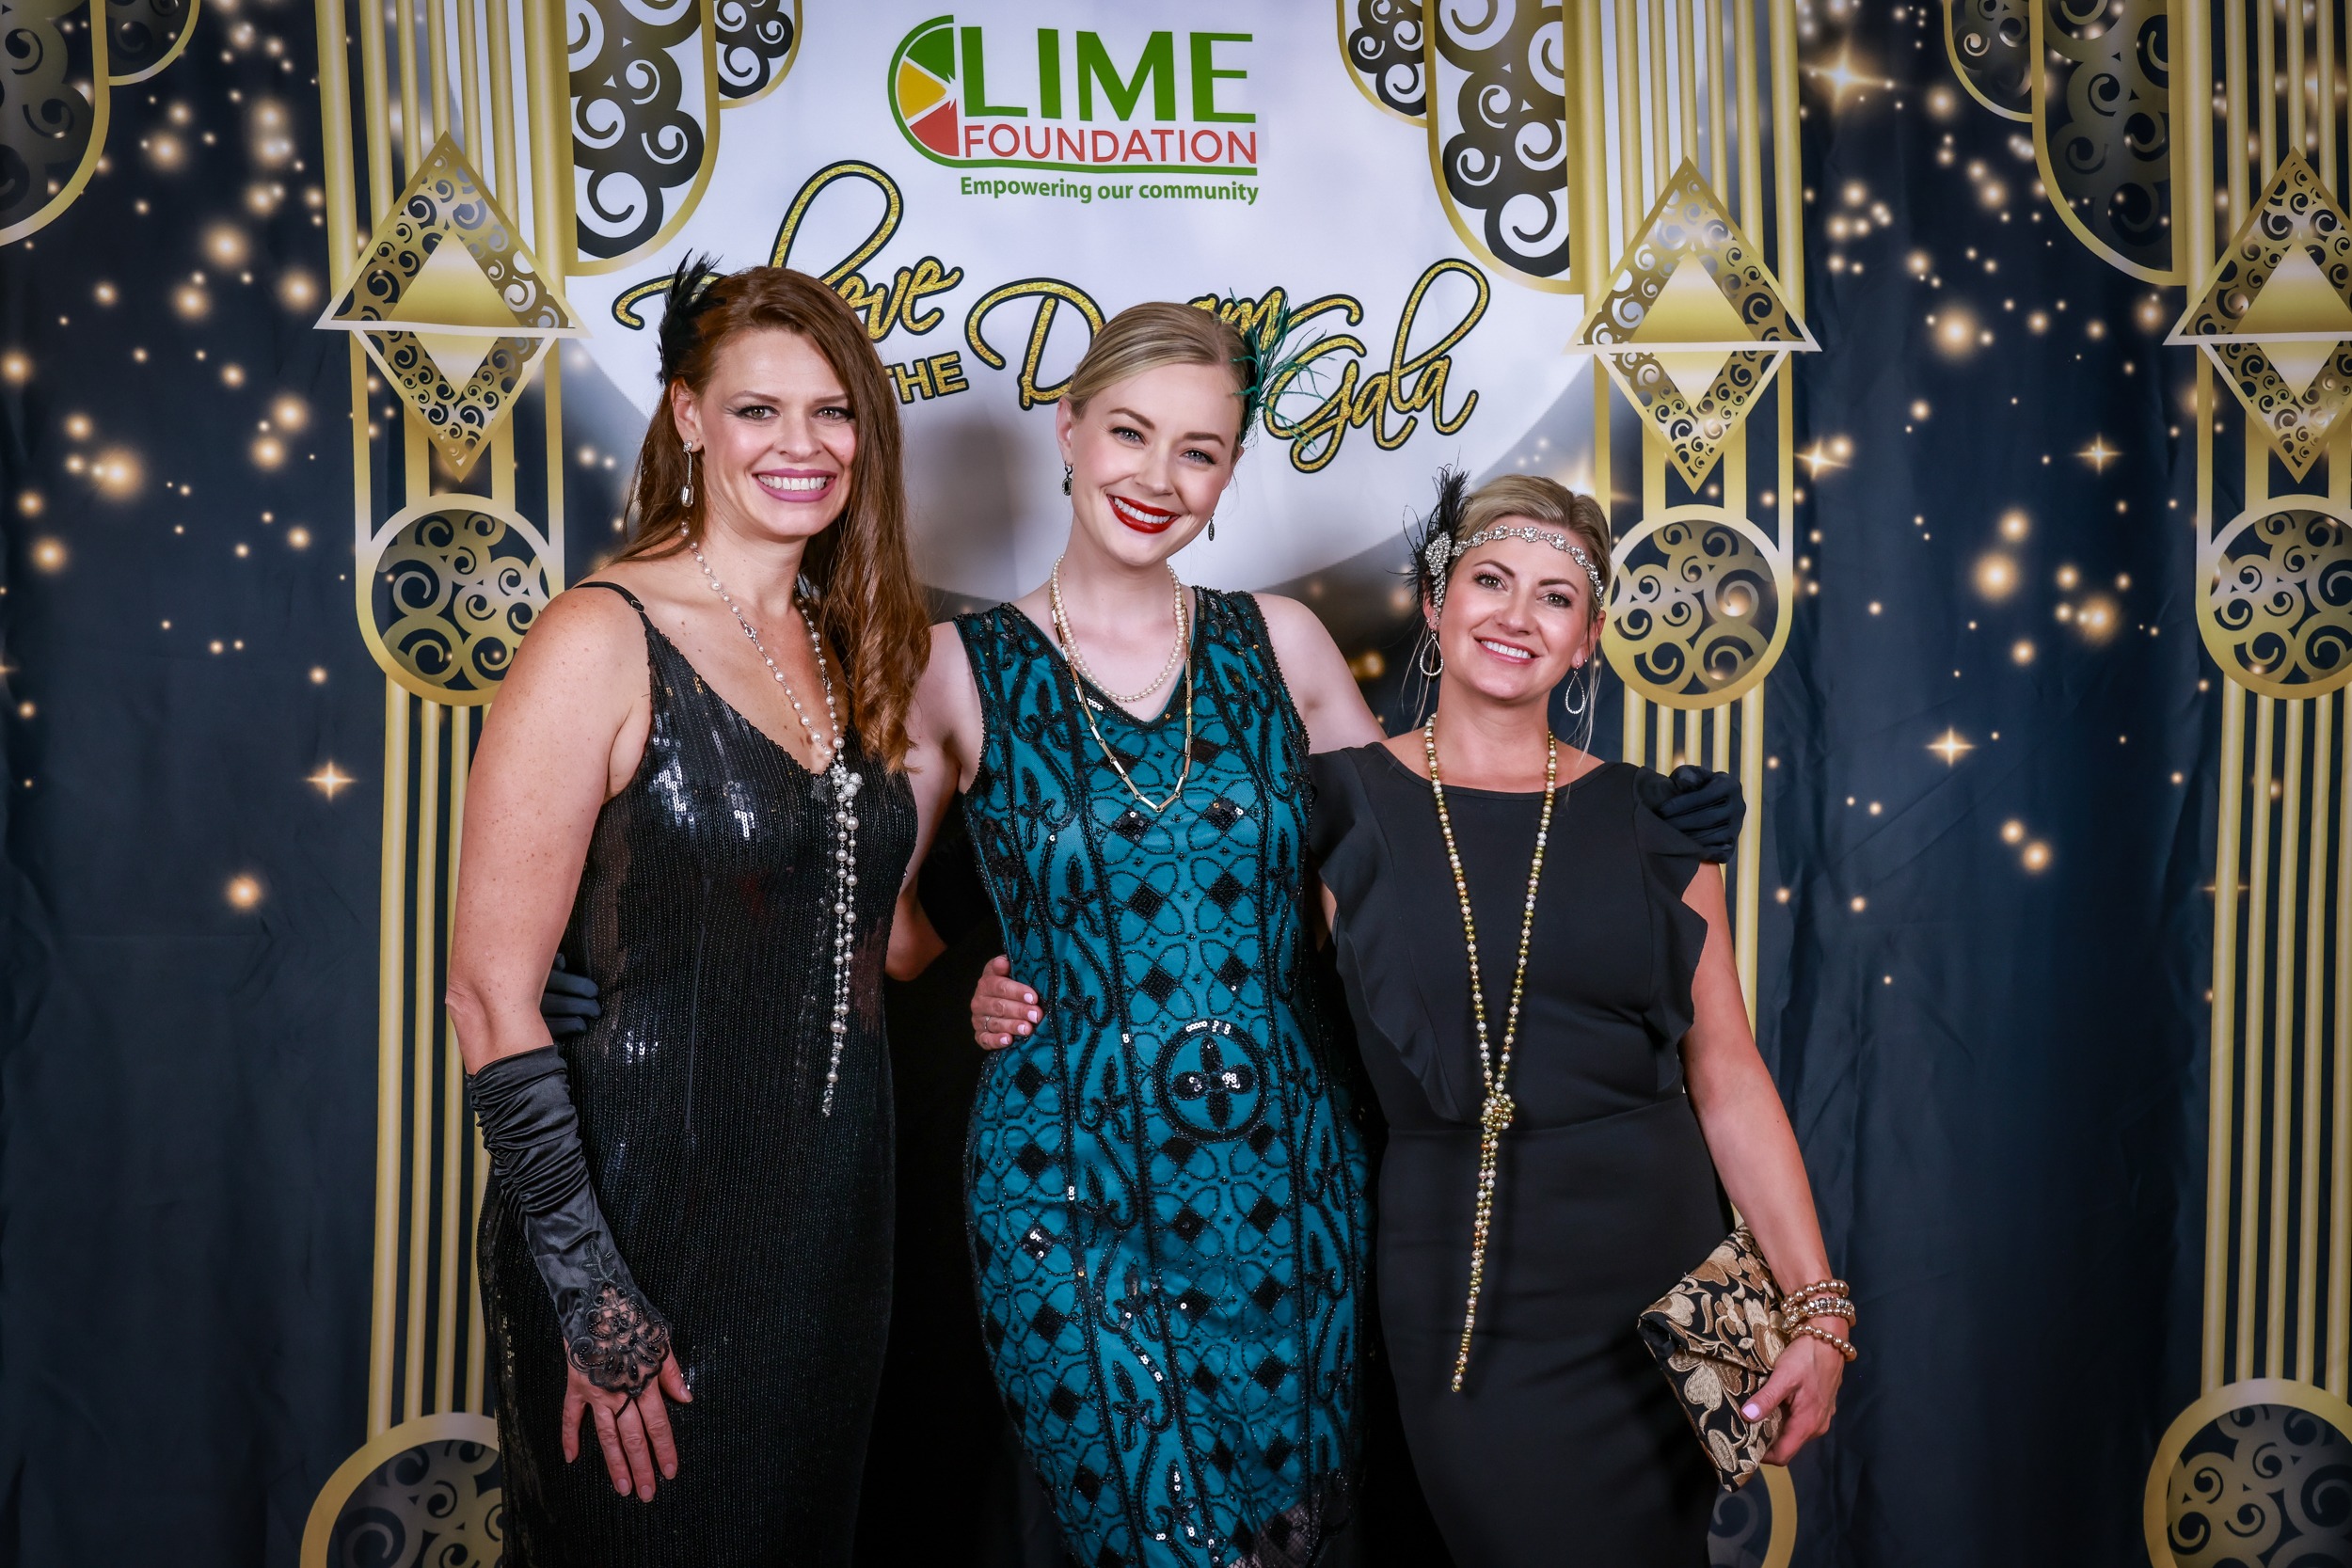 Three women posing for a photo at a Santa Rosa non-profit event hosted by The LIME Foundation.